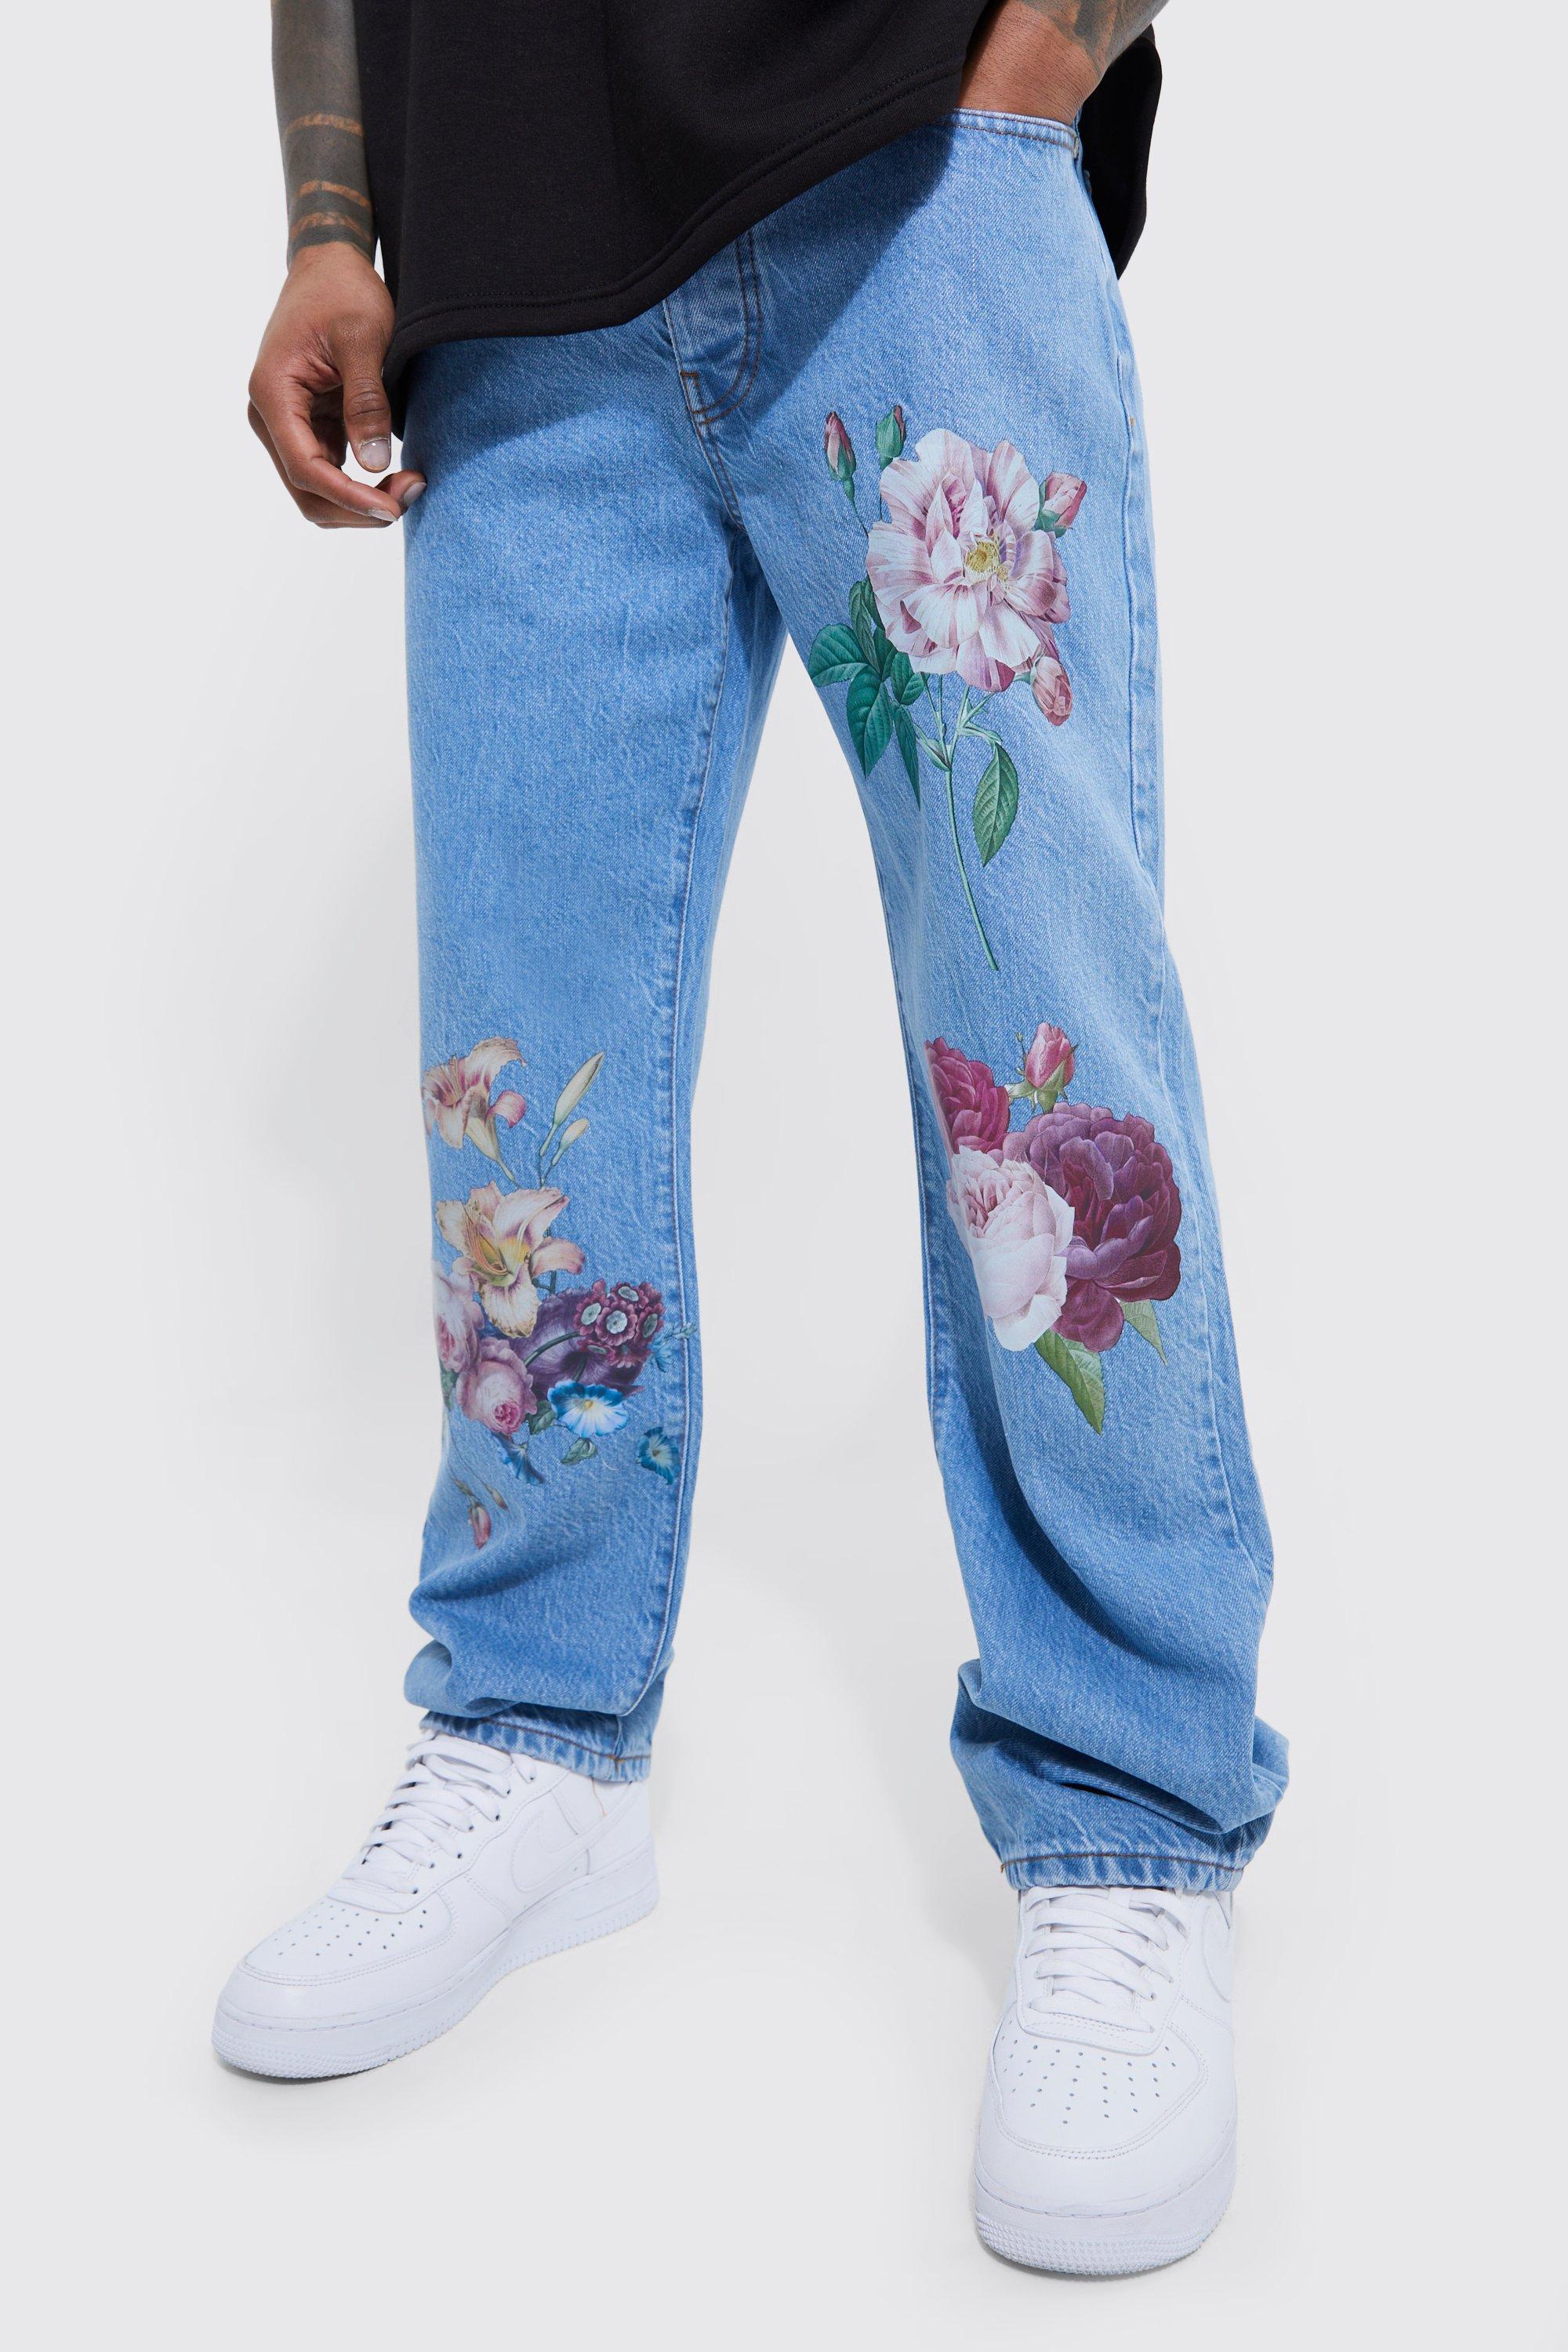 Forstyrre propel Gym Relaxed Fit Floral Print Jeans | boohooMAN USA